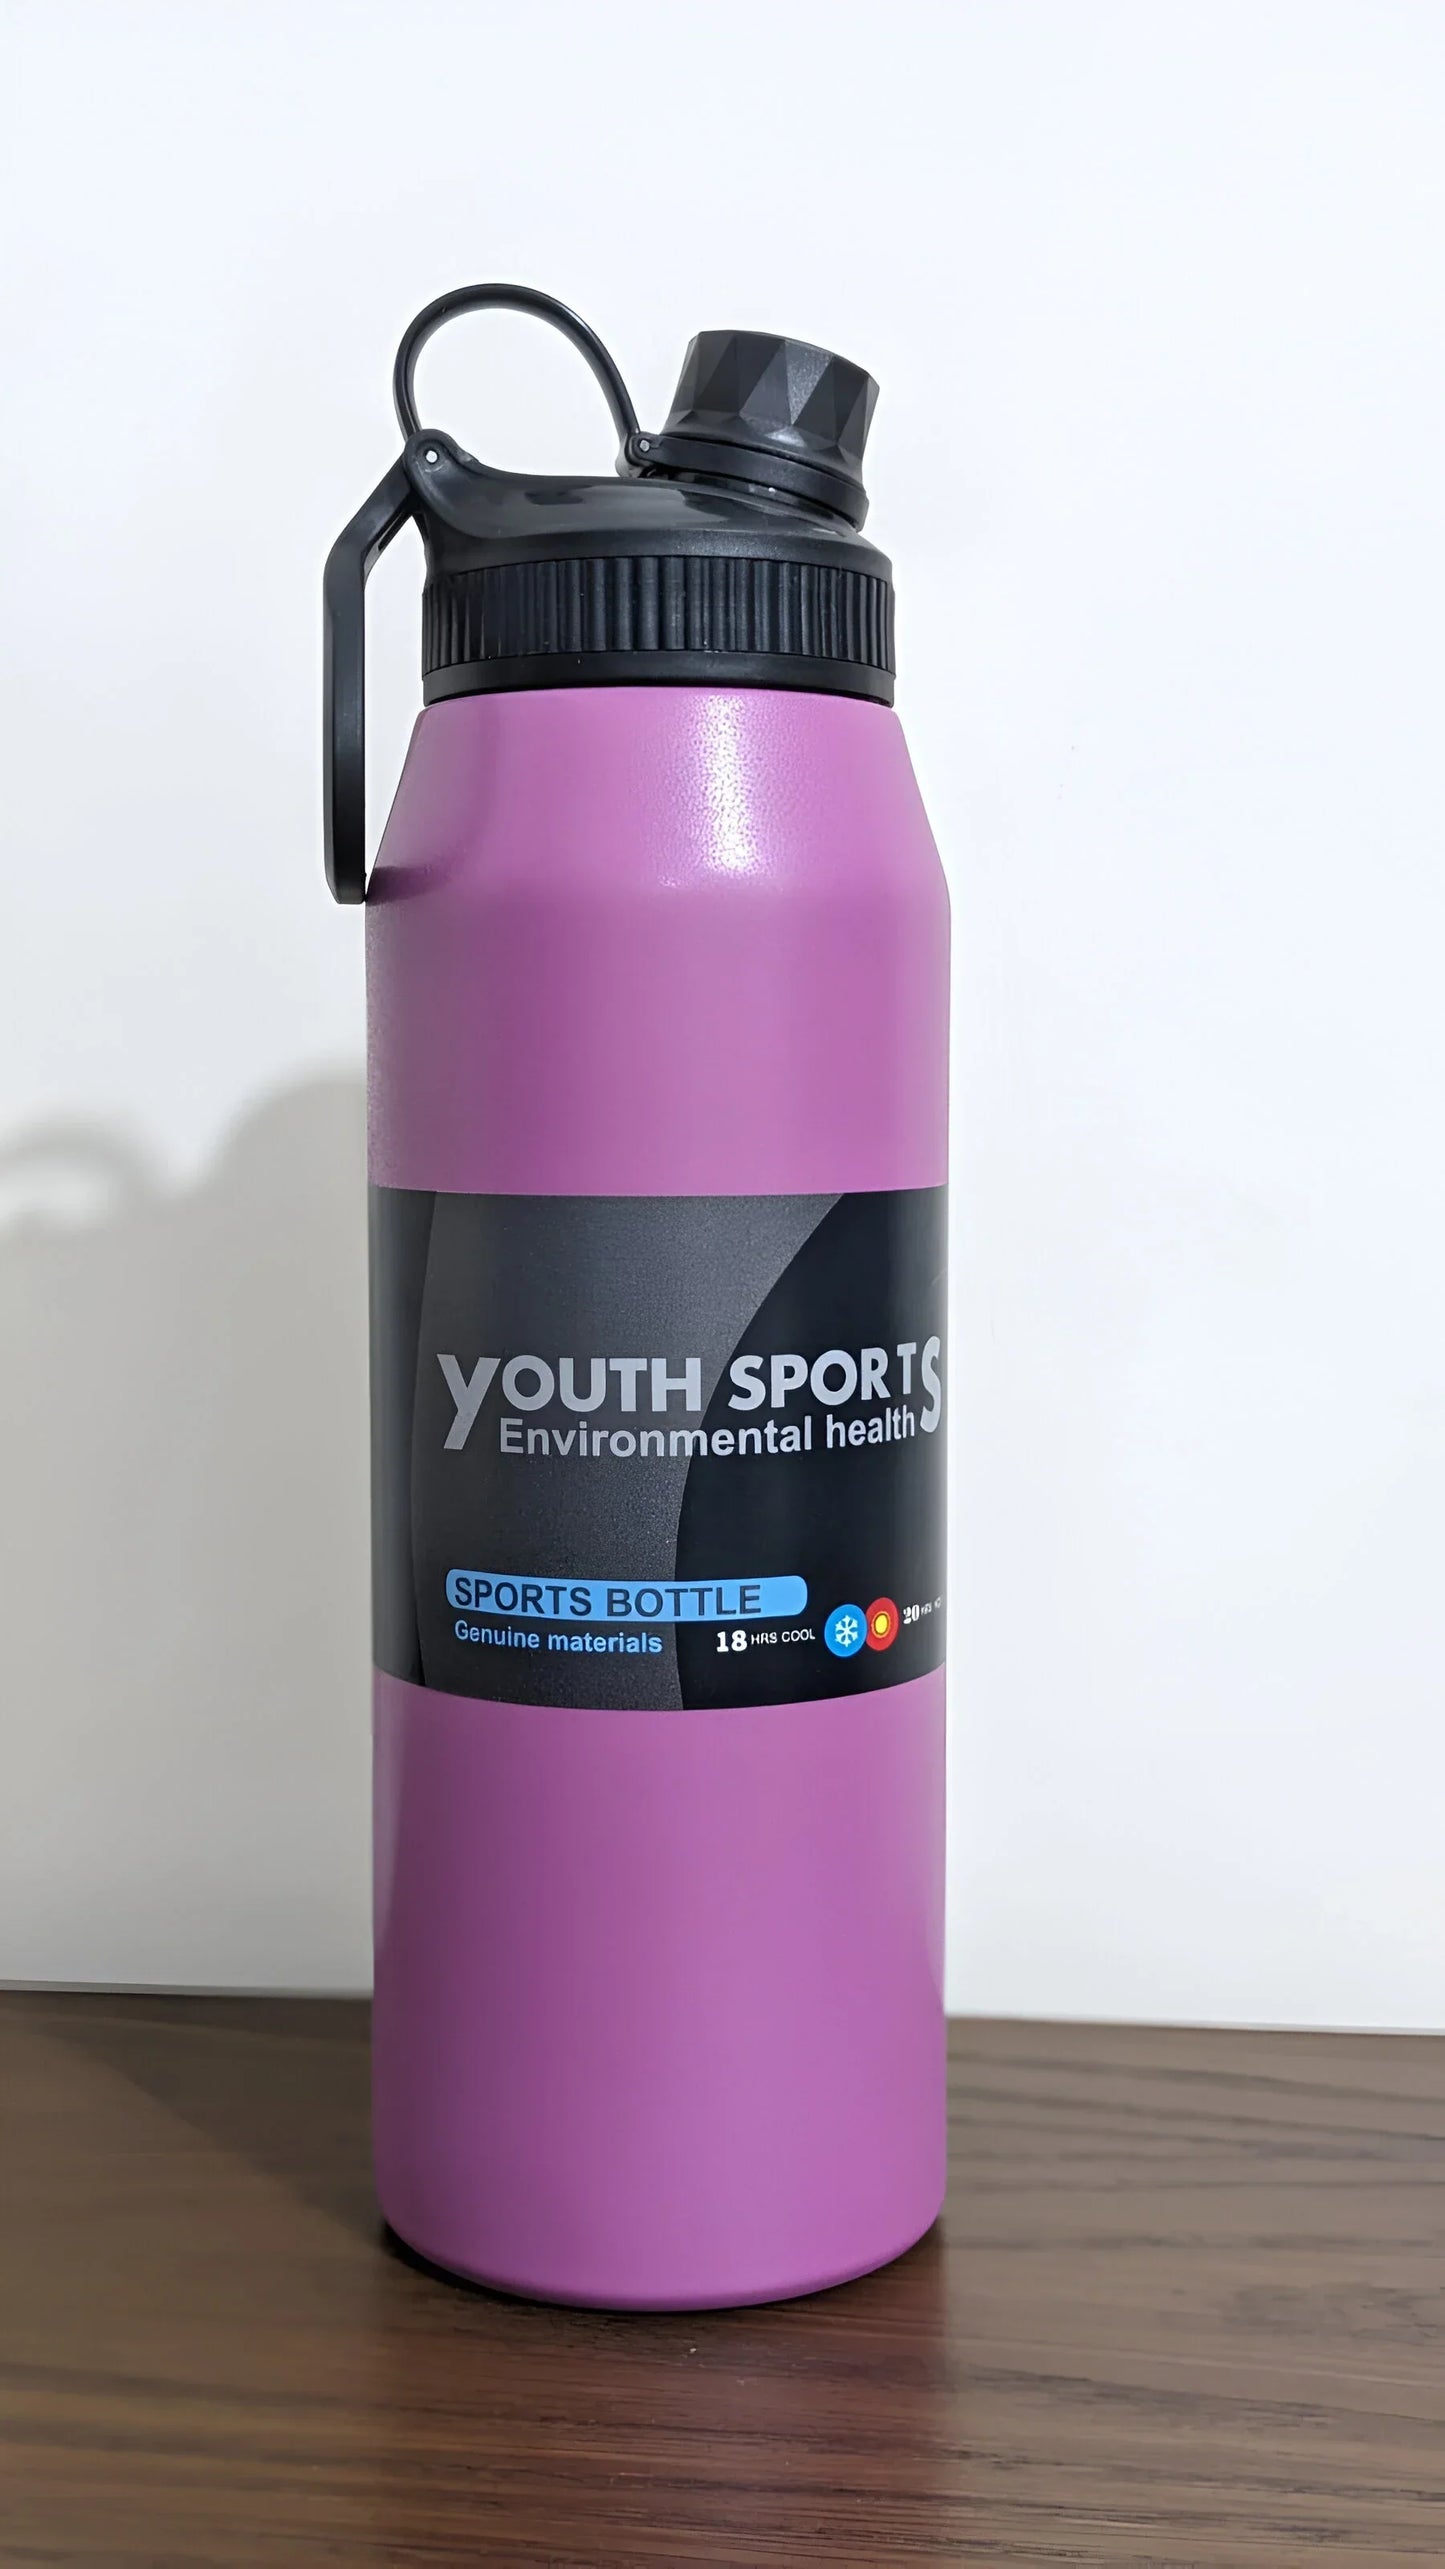 YOUTH SPORTS Water Bottle